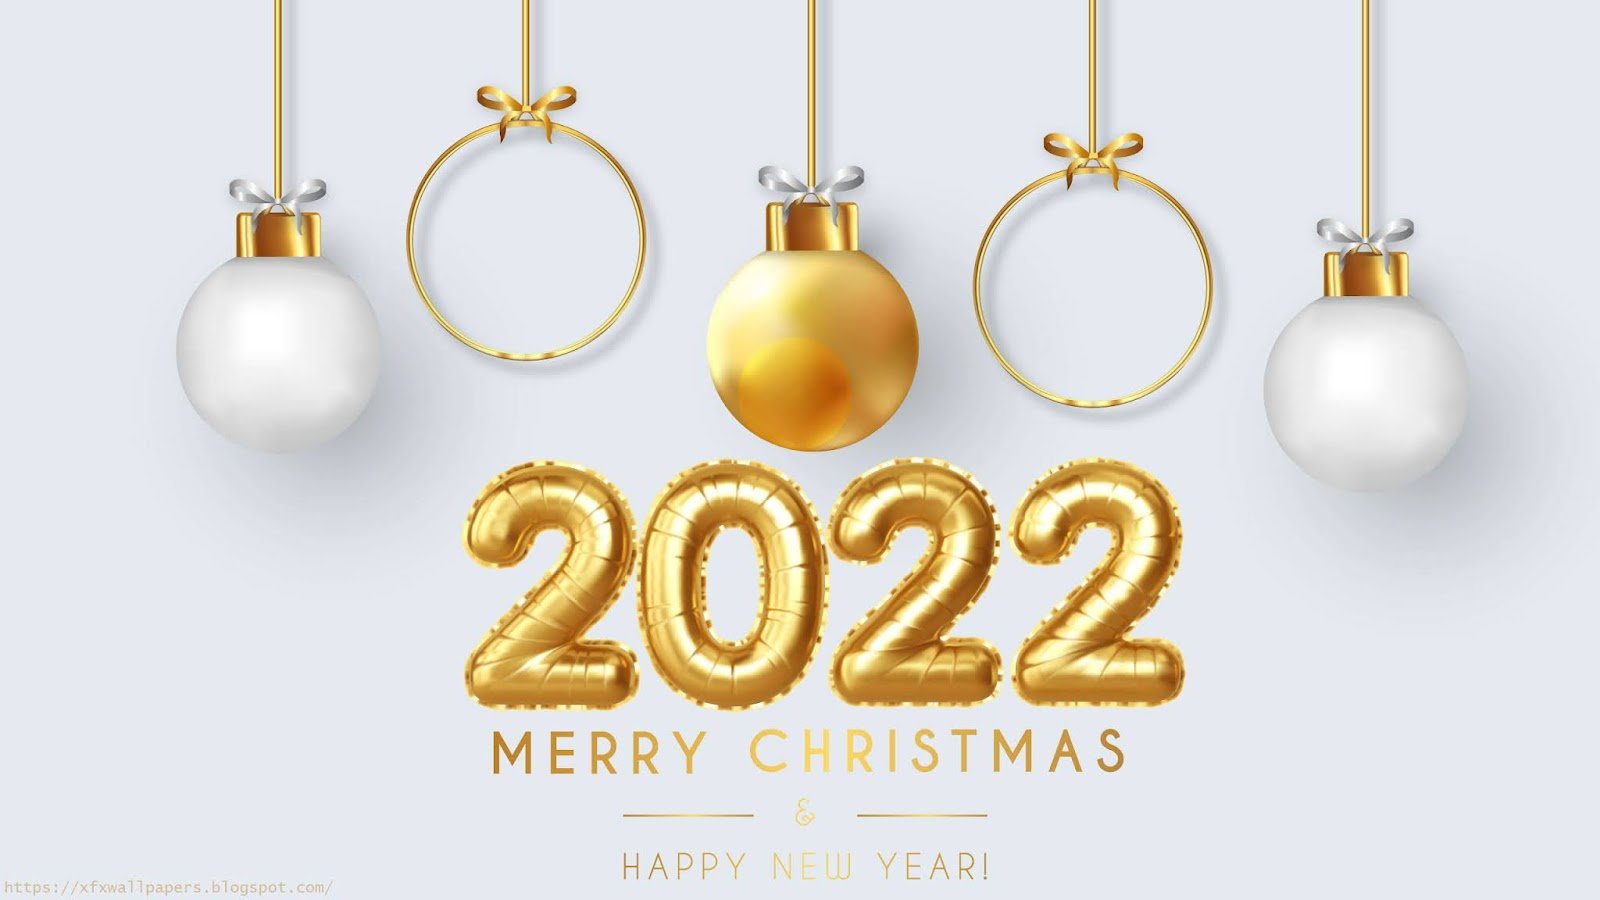 Merry Christmas Wallpapers 2022